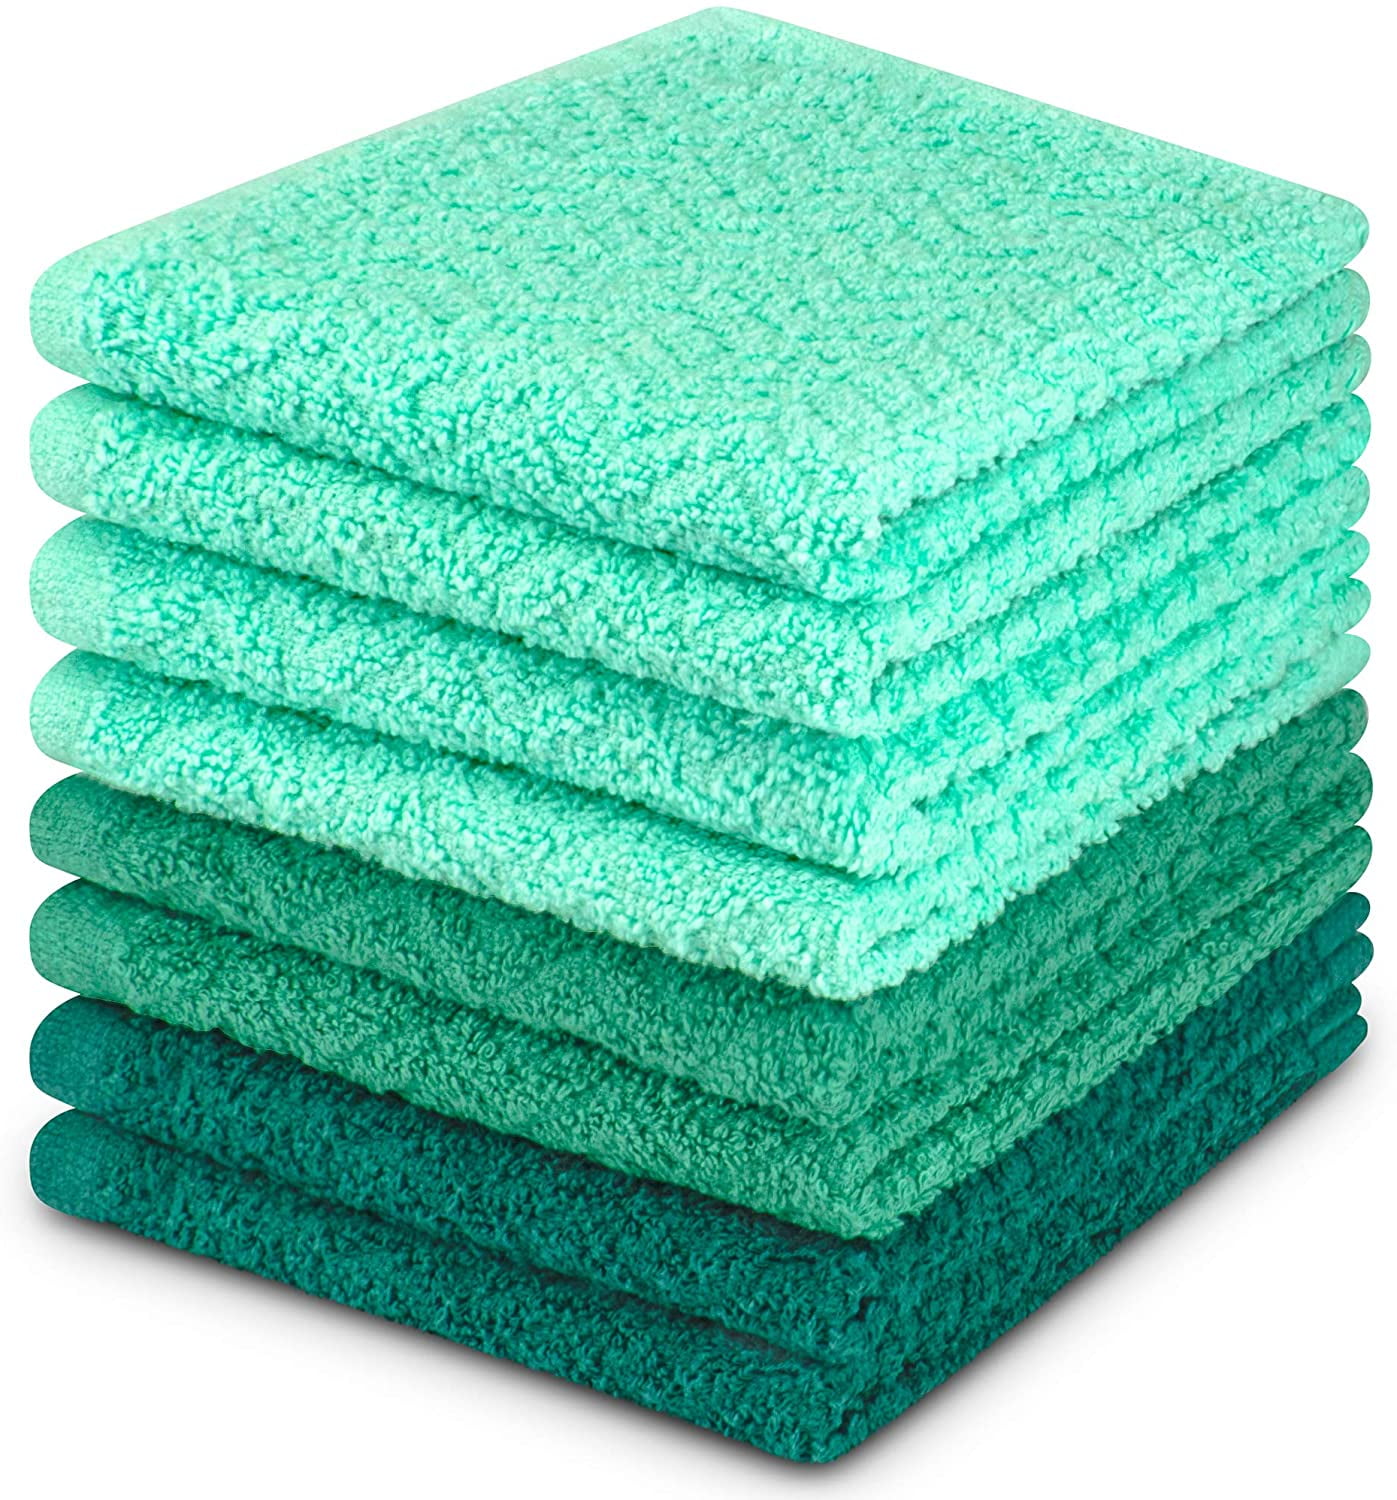 Dish Towels for Kitchen 11.81x11.81 inches, Pack of 8 Cotton